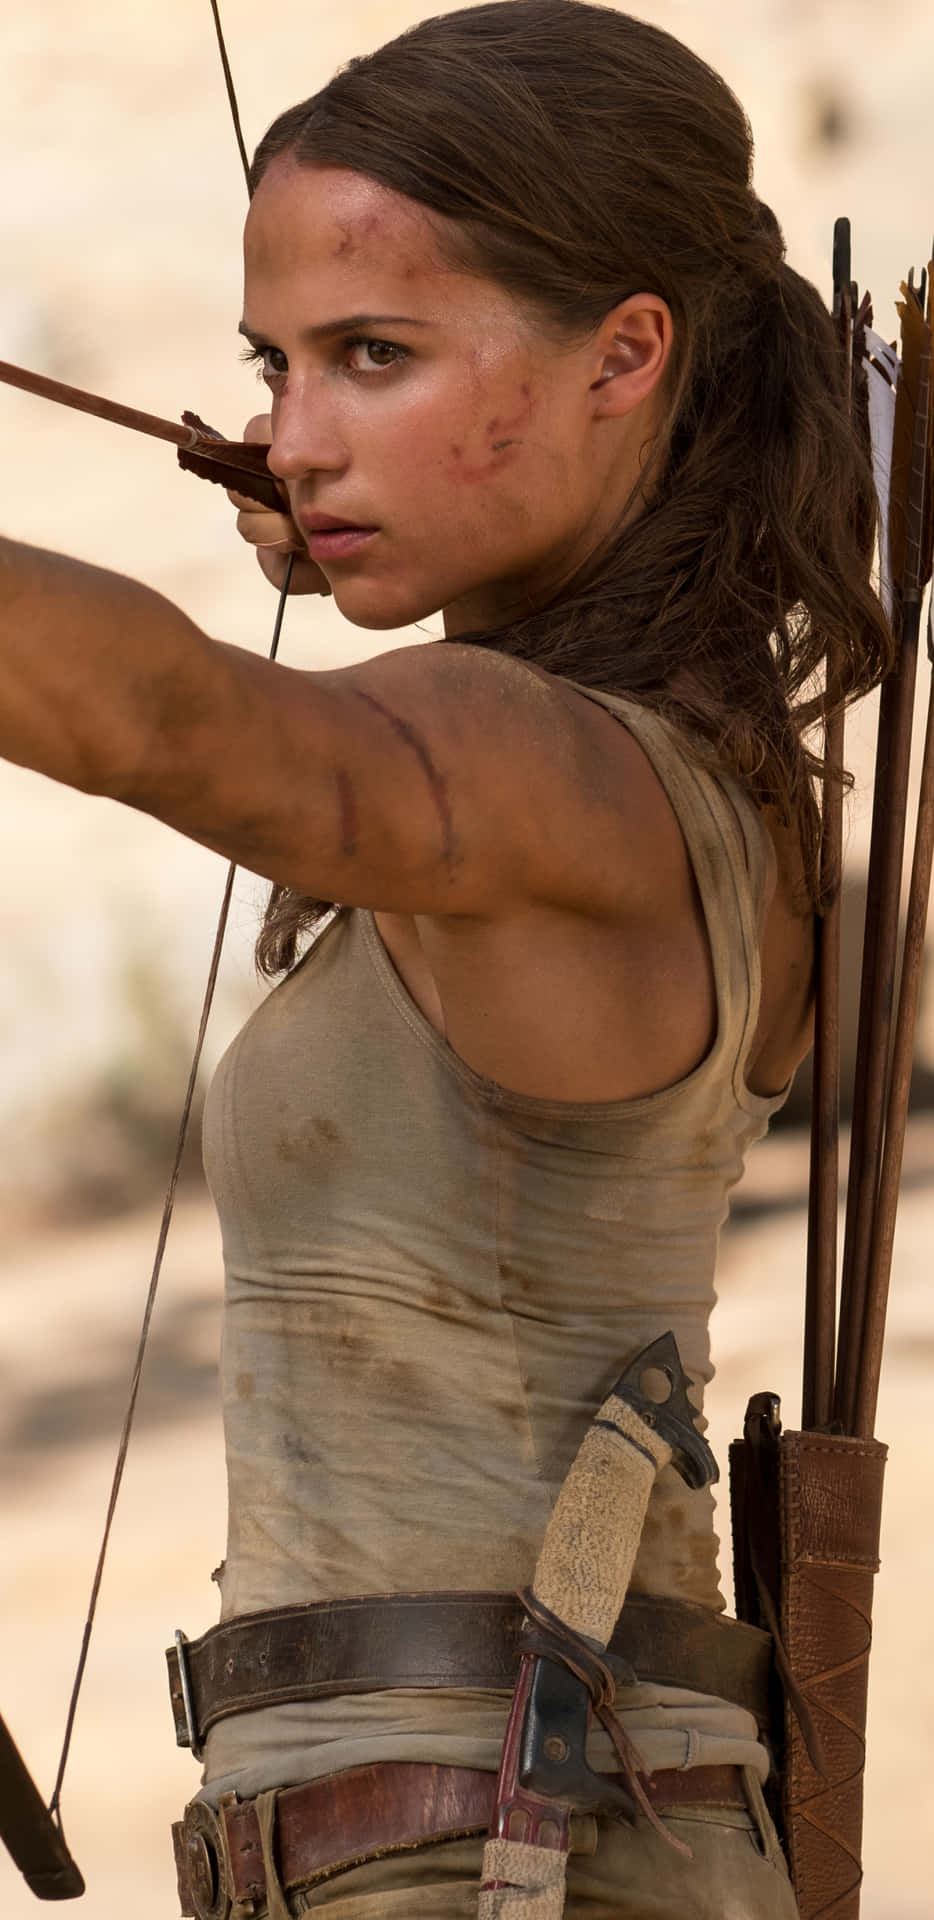 Get Ready For Your Next Adventure With The Tomb Raider Phone Background